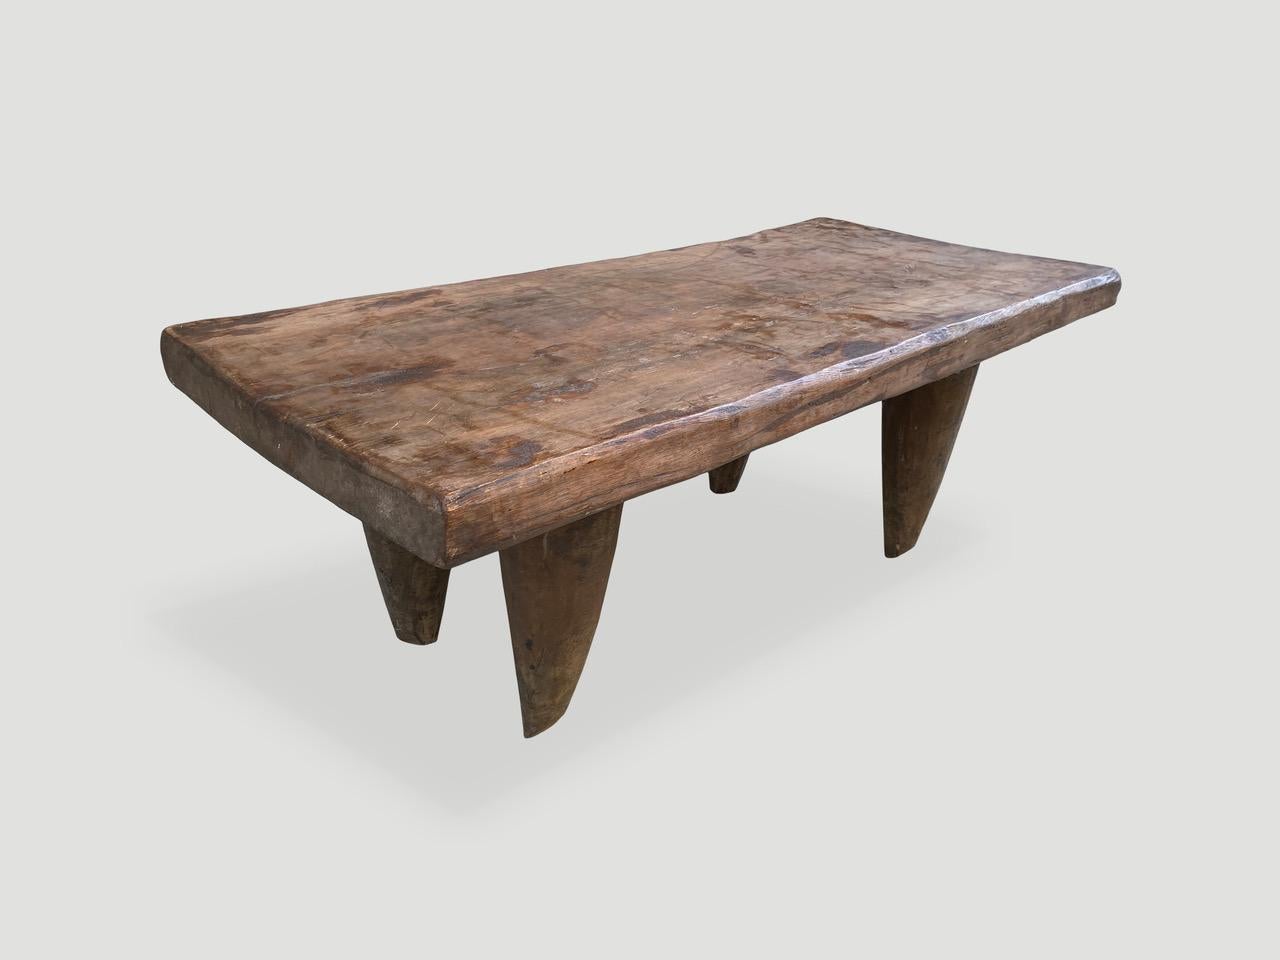 Antique coffee table or bench hand carved by the Senufo tribes from a single block of iroko wood, native to the west coast of Africa. The wood is tough, dense and very durable. Shown with cone style legs and with a two inch thick top. An unusual